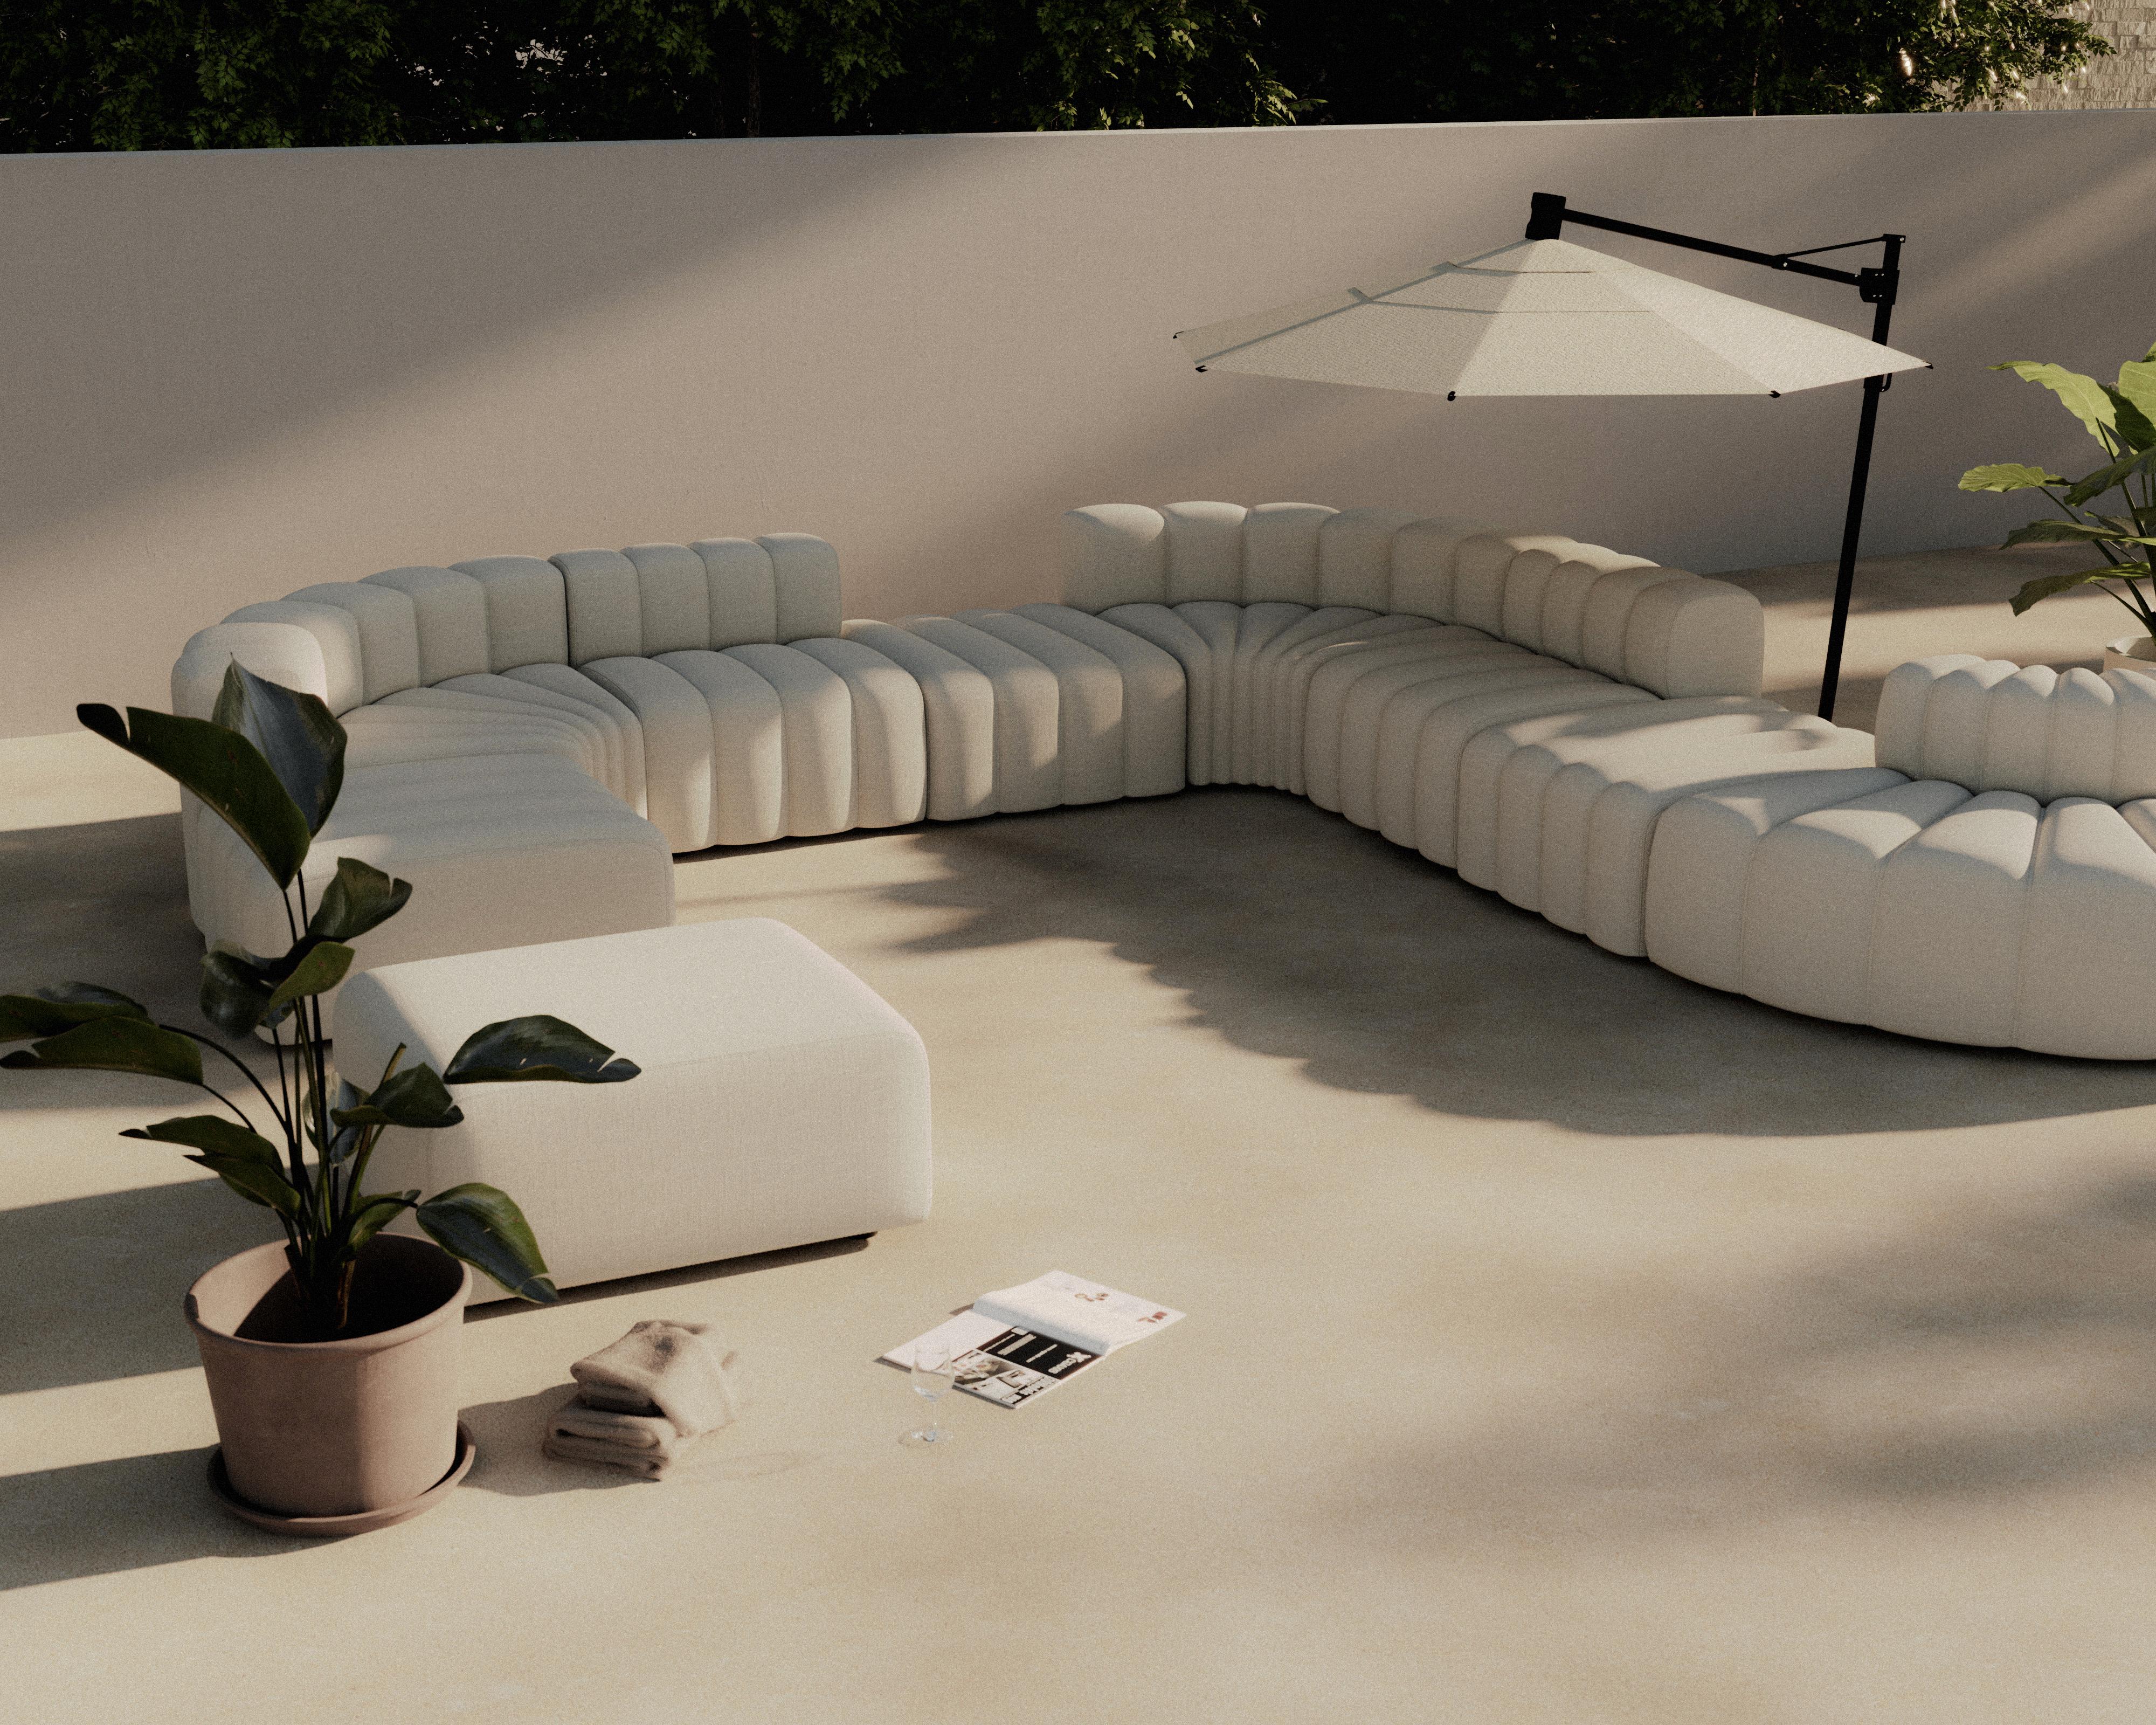 Other Studio Medium Modular Outdoor Sofa by NORR11 For Sale